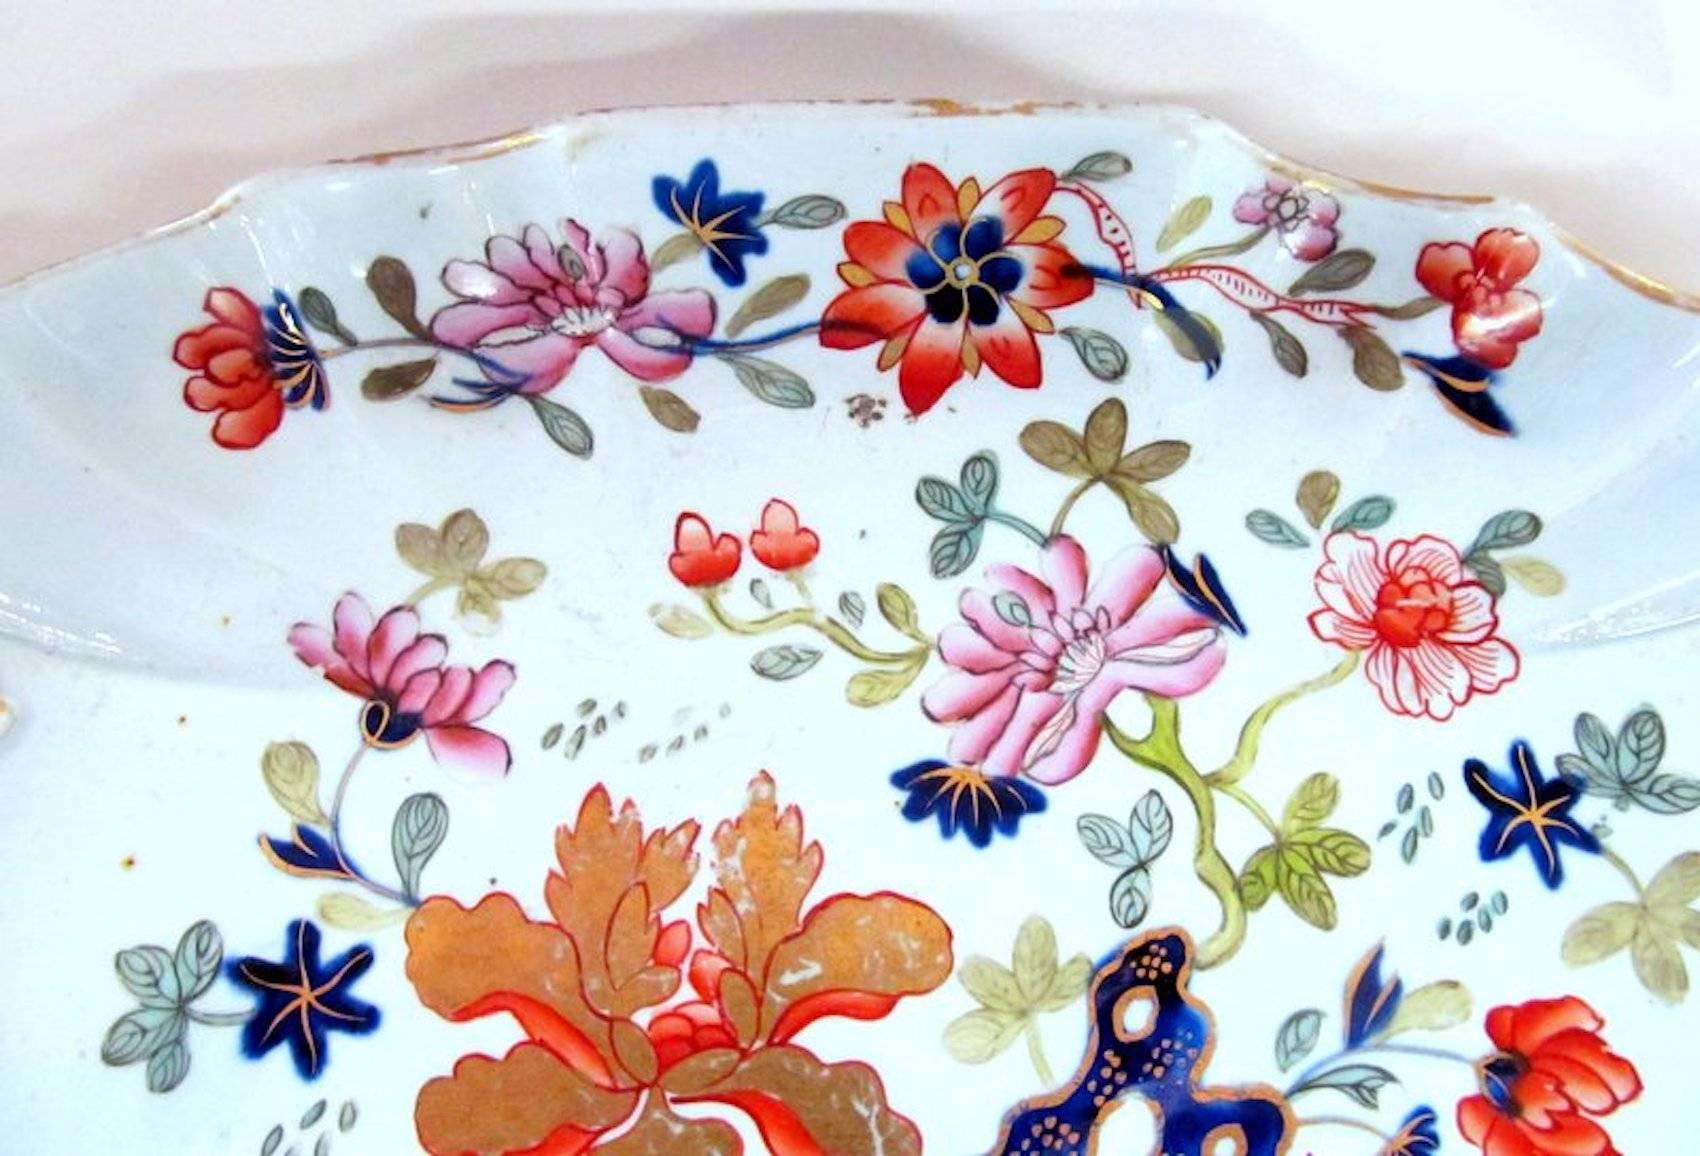 Rare early English period Mason's Ironstone Imari dessert dish.

As Illustrated in G. Godden's Mason's Ironstone as one of the earliest examples of Mason's Ironstone and one of its earliest impressed marks.